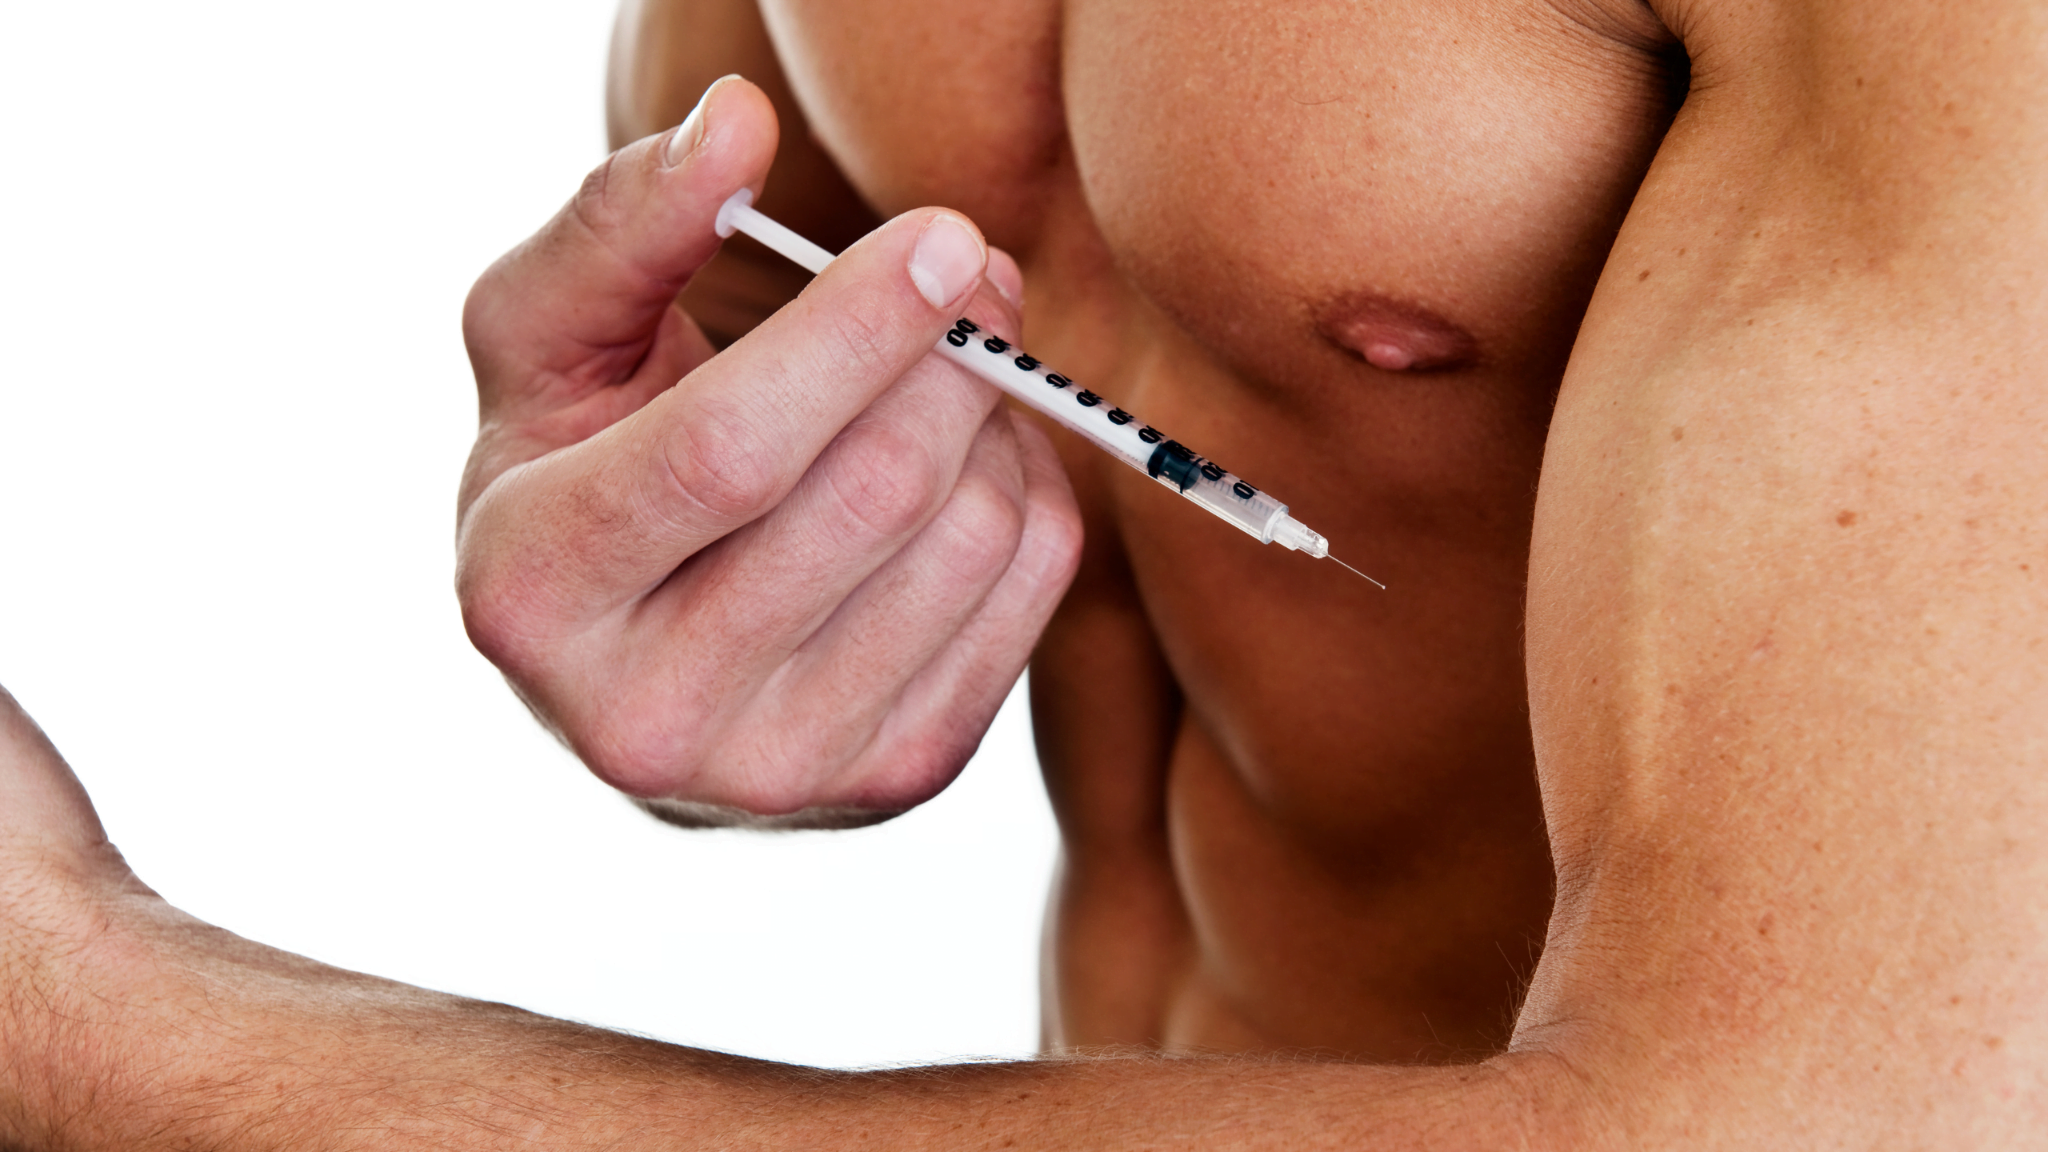 The effect of anabolic steroids on connective tissue health